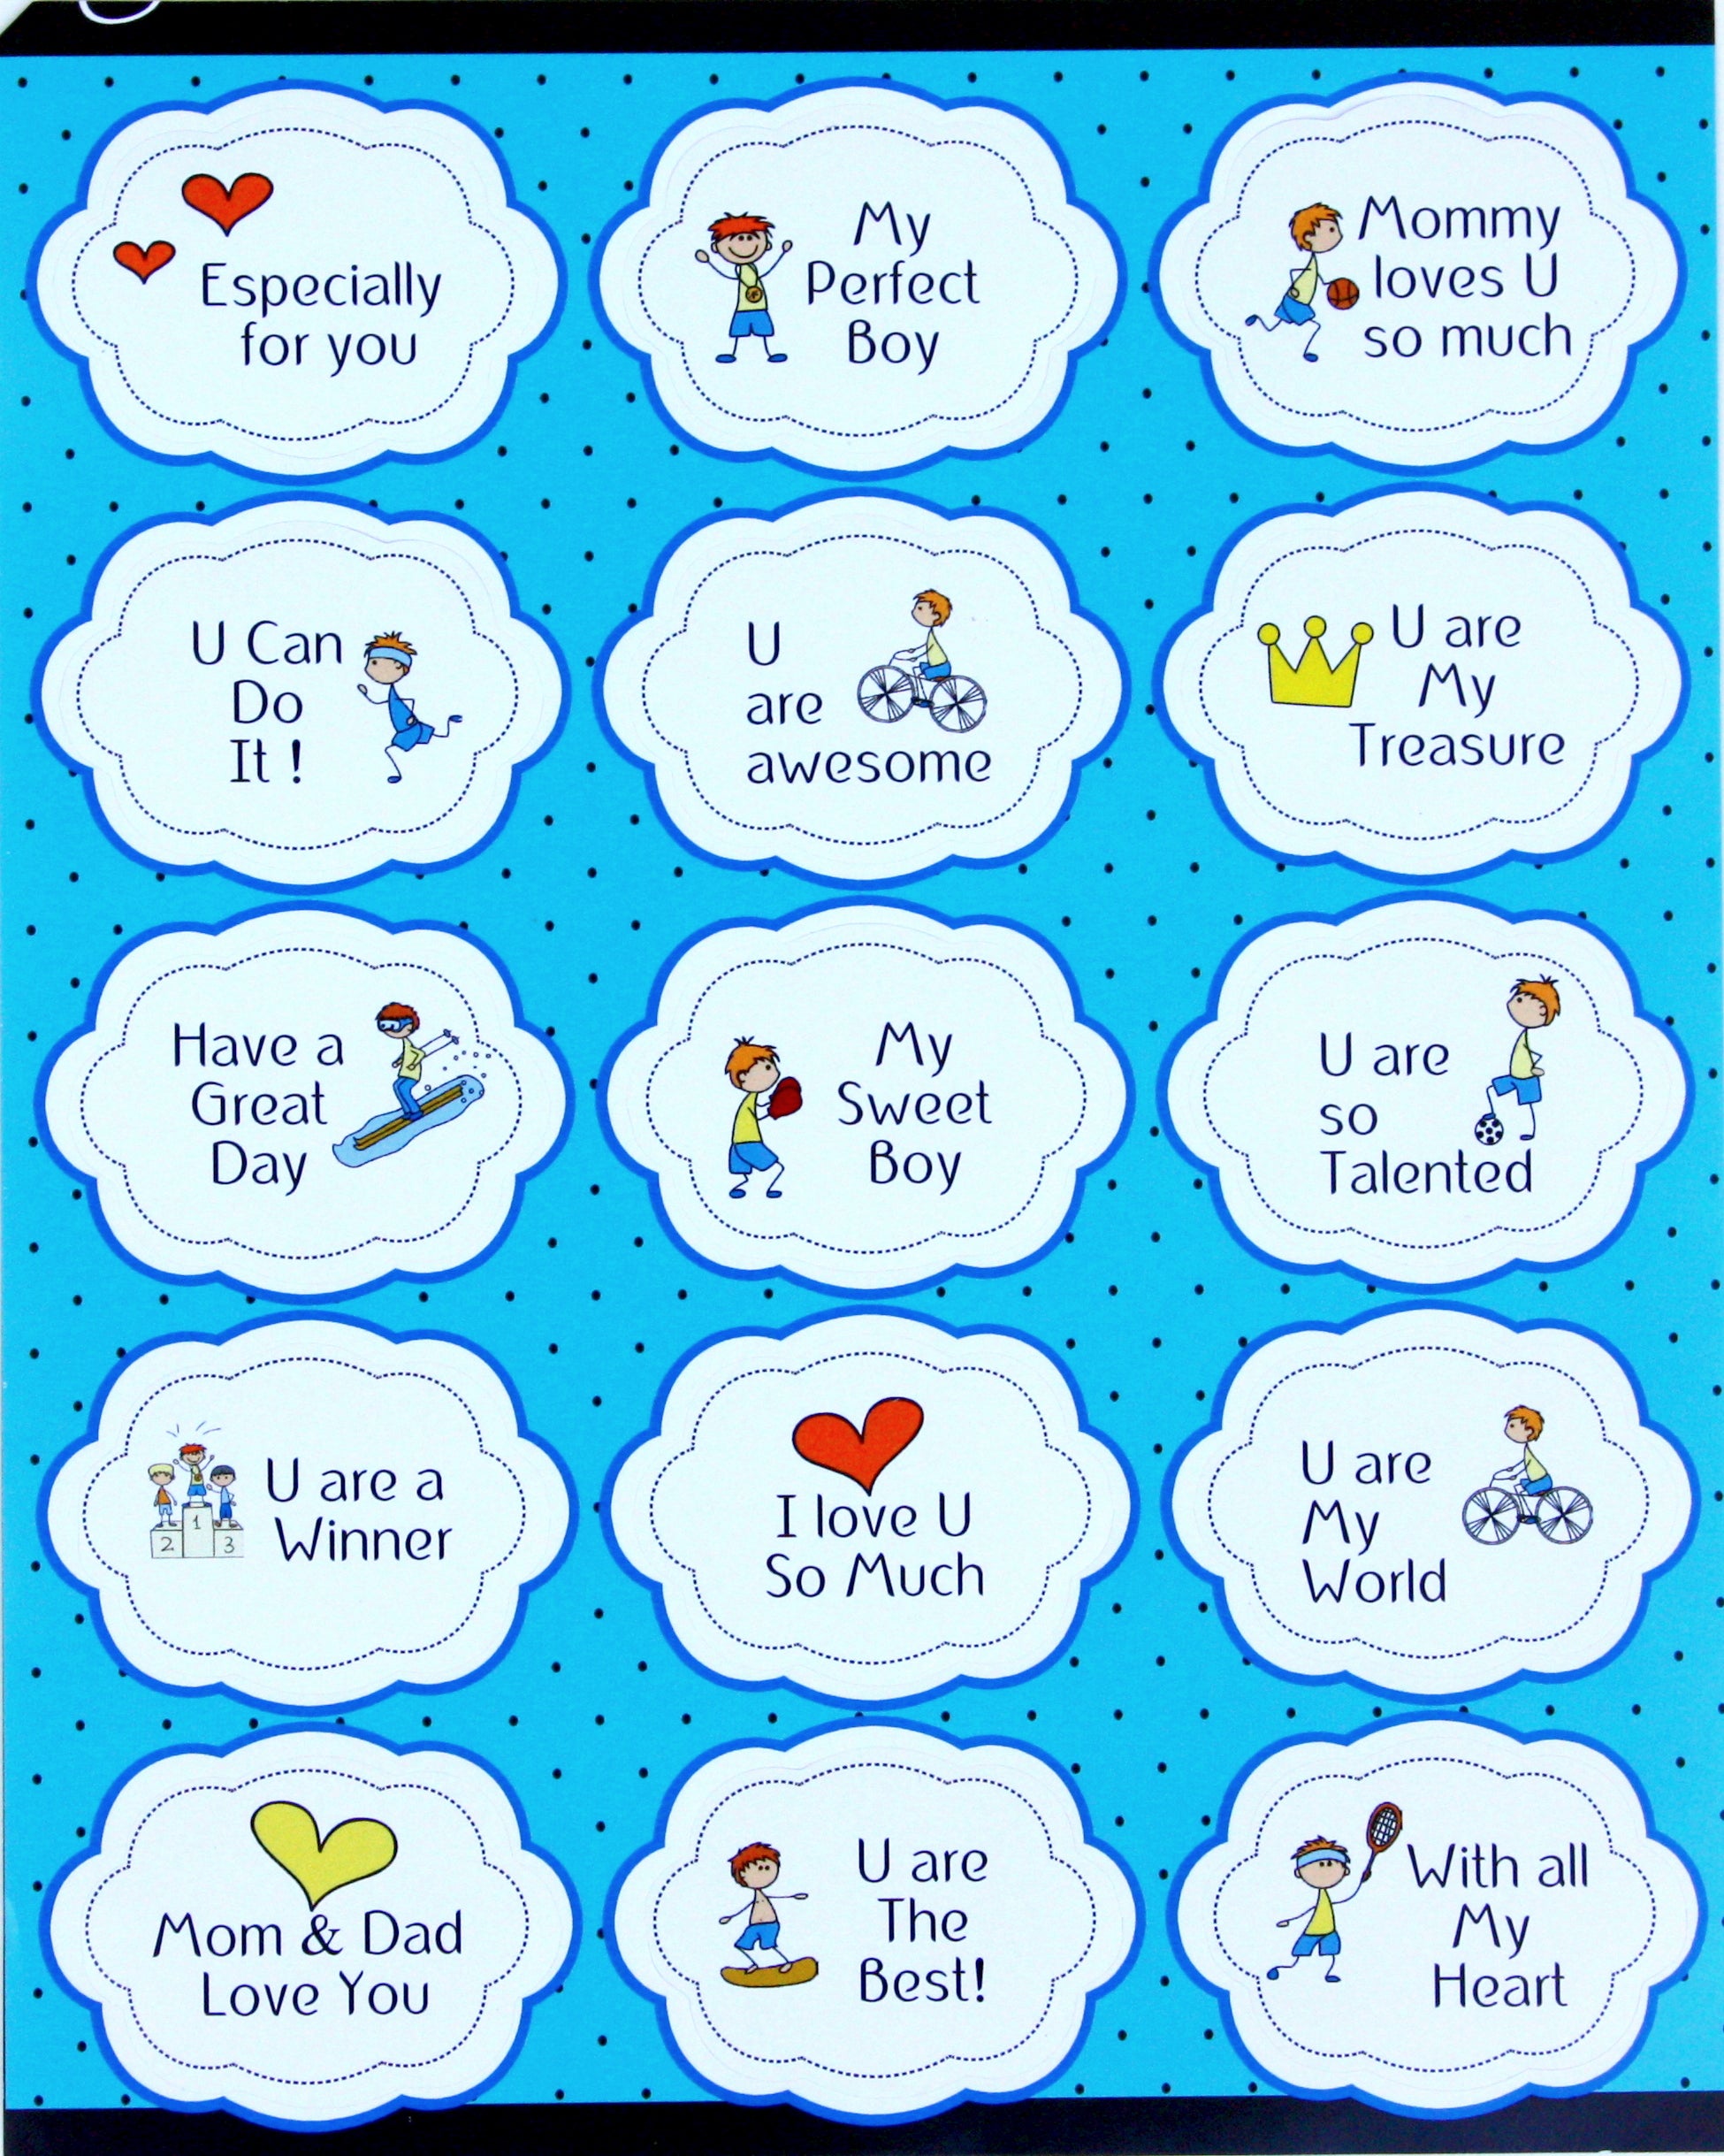 Inspiring Quotes Stickers- Motivational Stickers pack for Adults and Kids  Sticker for Sale by AmazingEcraft